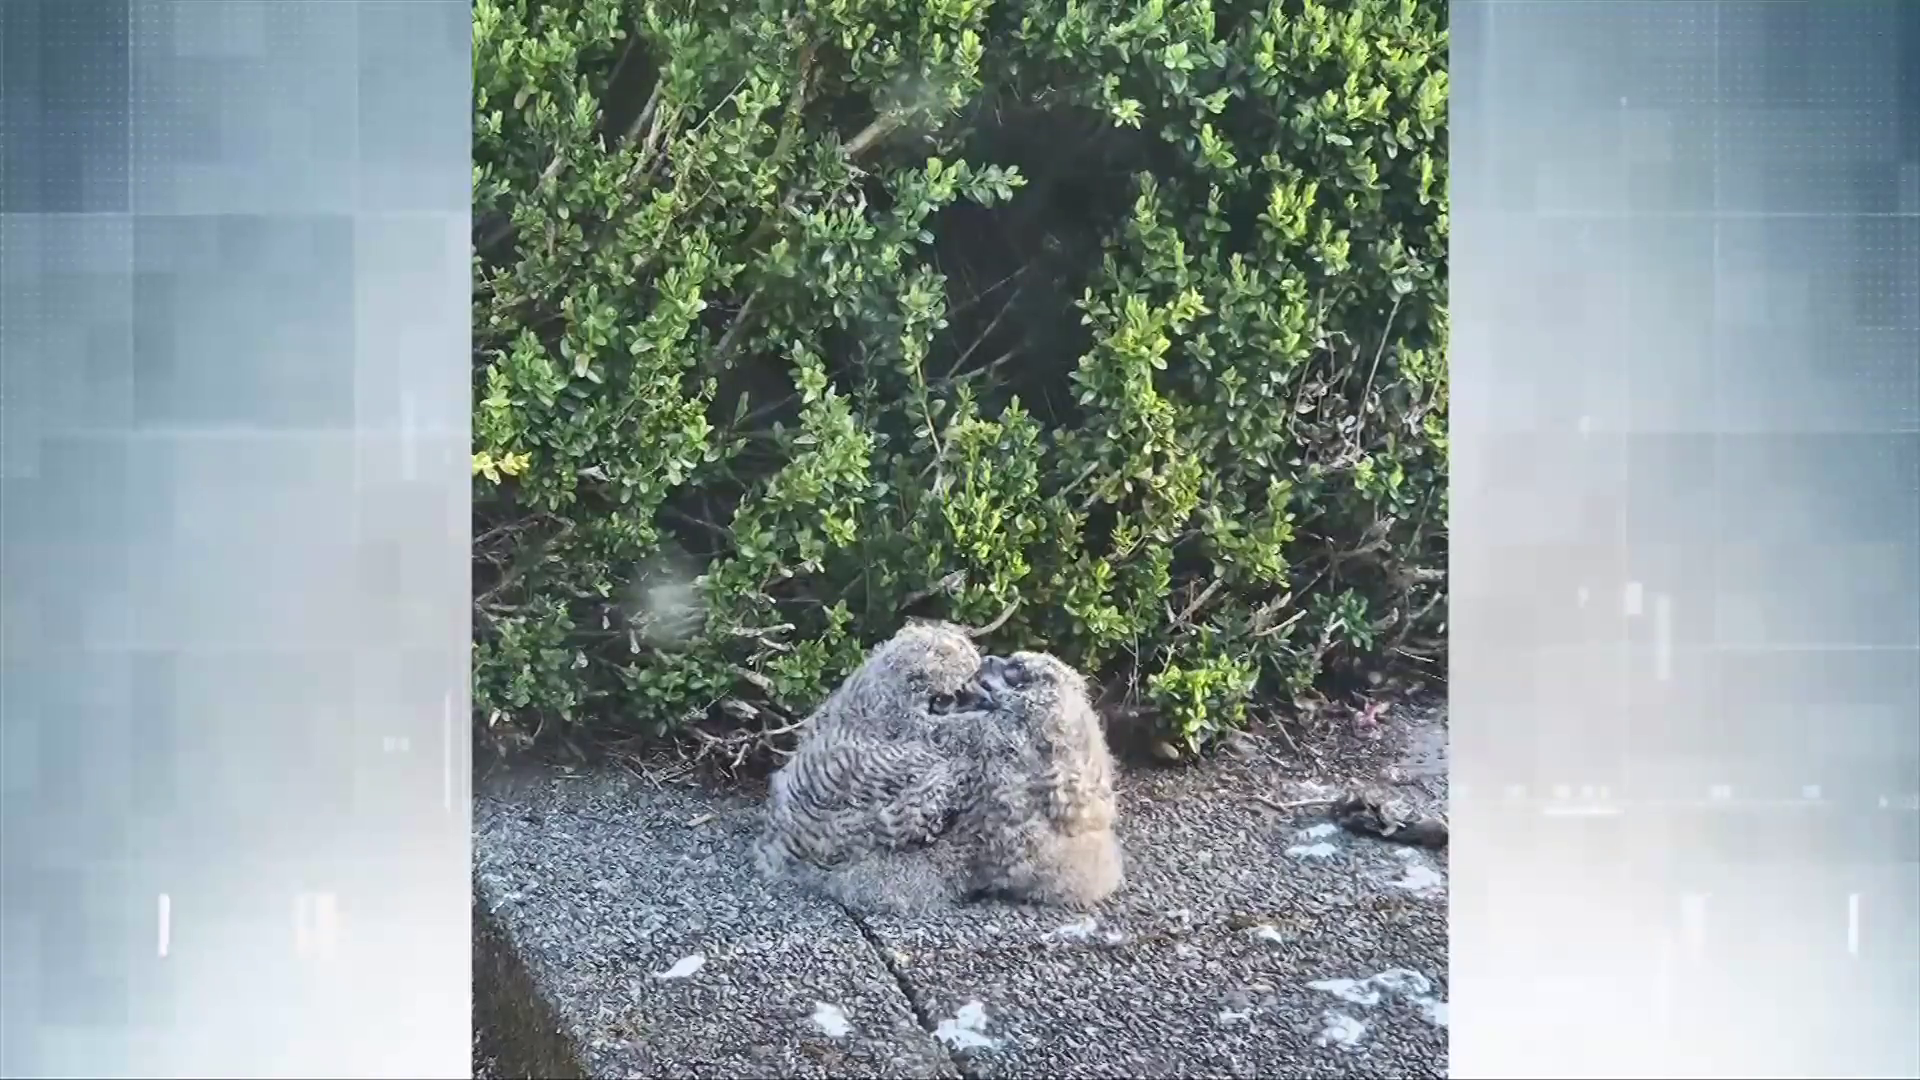 'We had a little surprise': Great horned owls move into Cowichan Bay yard to raise chicks